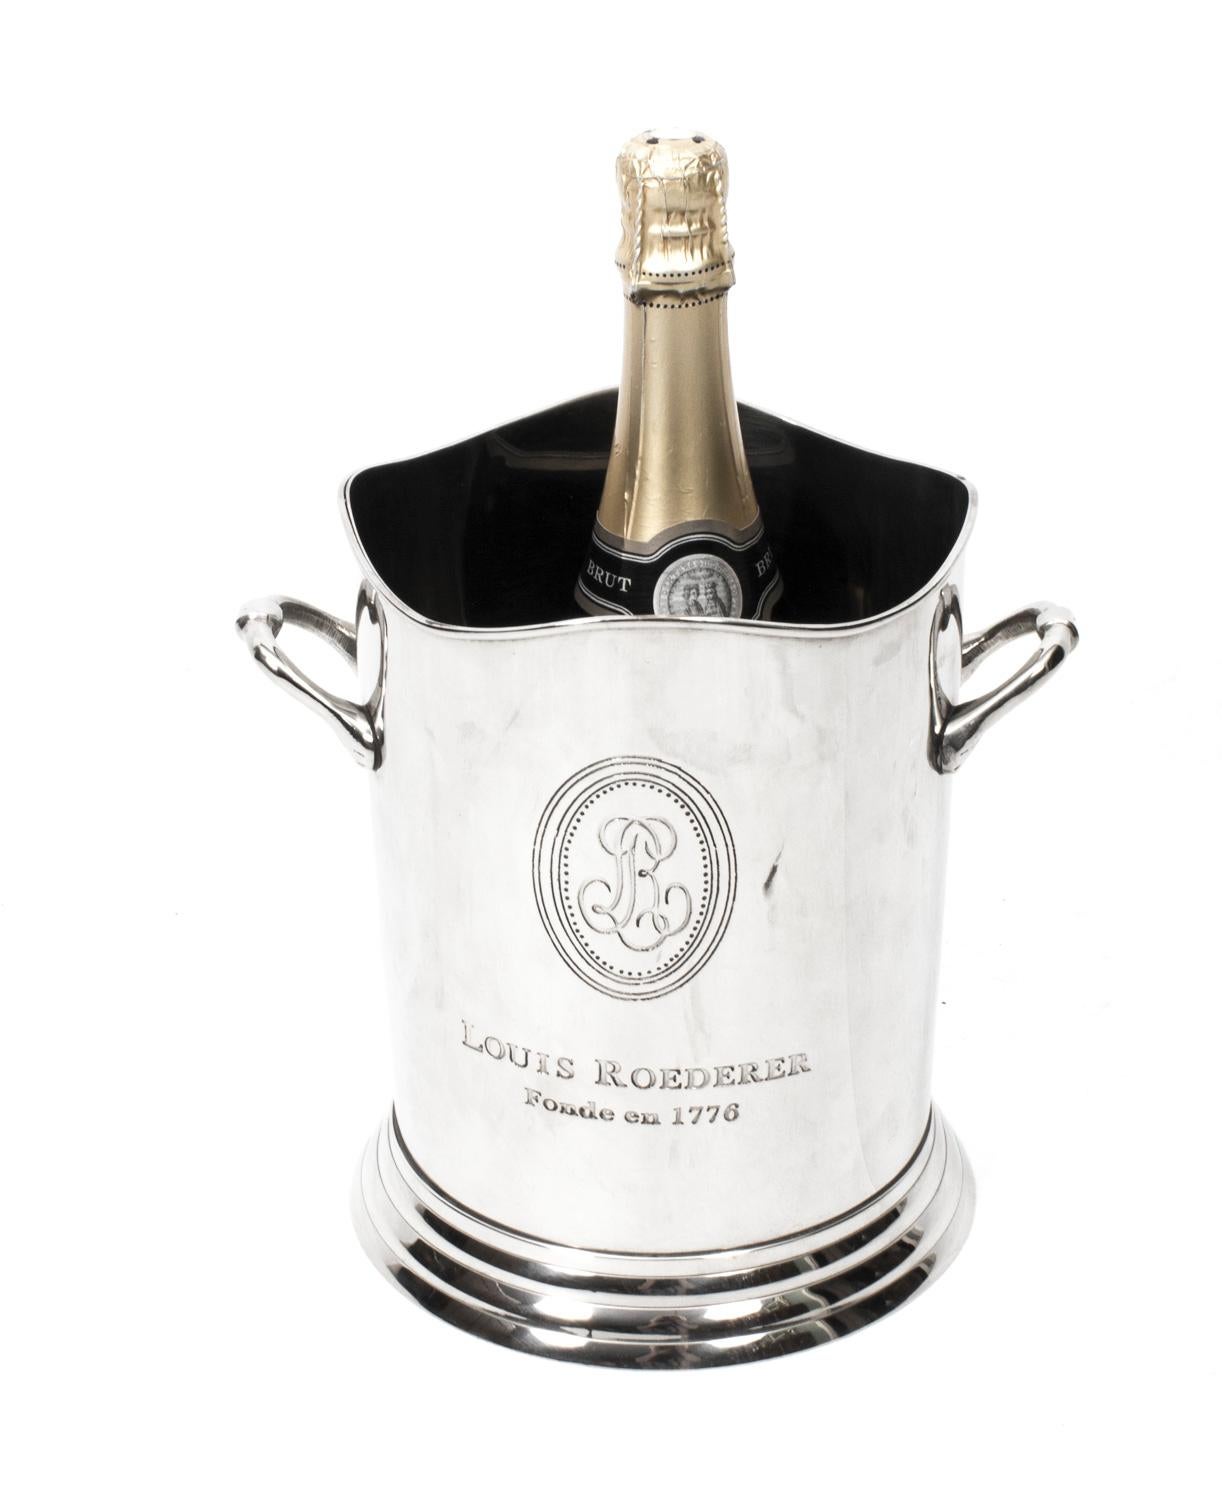 This is a gorgeous vintage pair of silver plated champagne / wine coolers. 

They are each boldly engraved Louis Roederer Fonde en 1776 on the sides with the LR logo.

Each cooler has twin carrying handles and the lip of each is decoratively